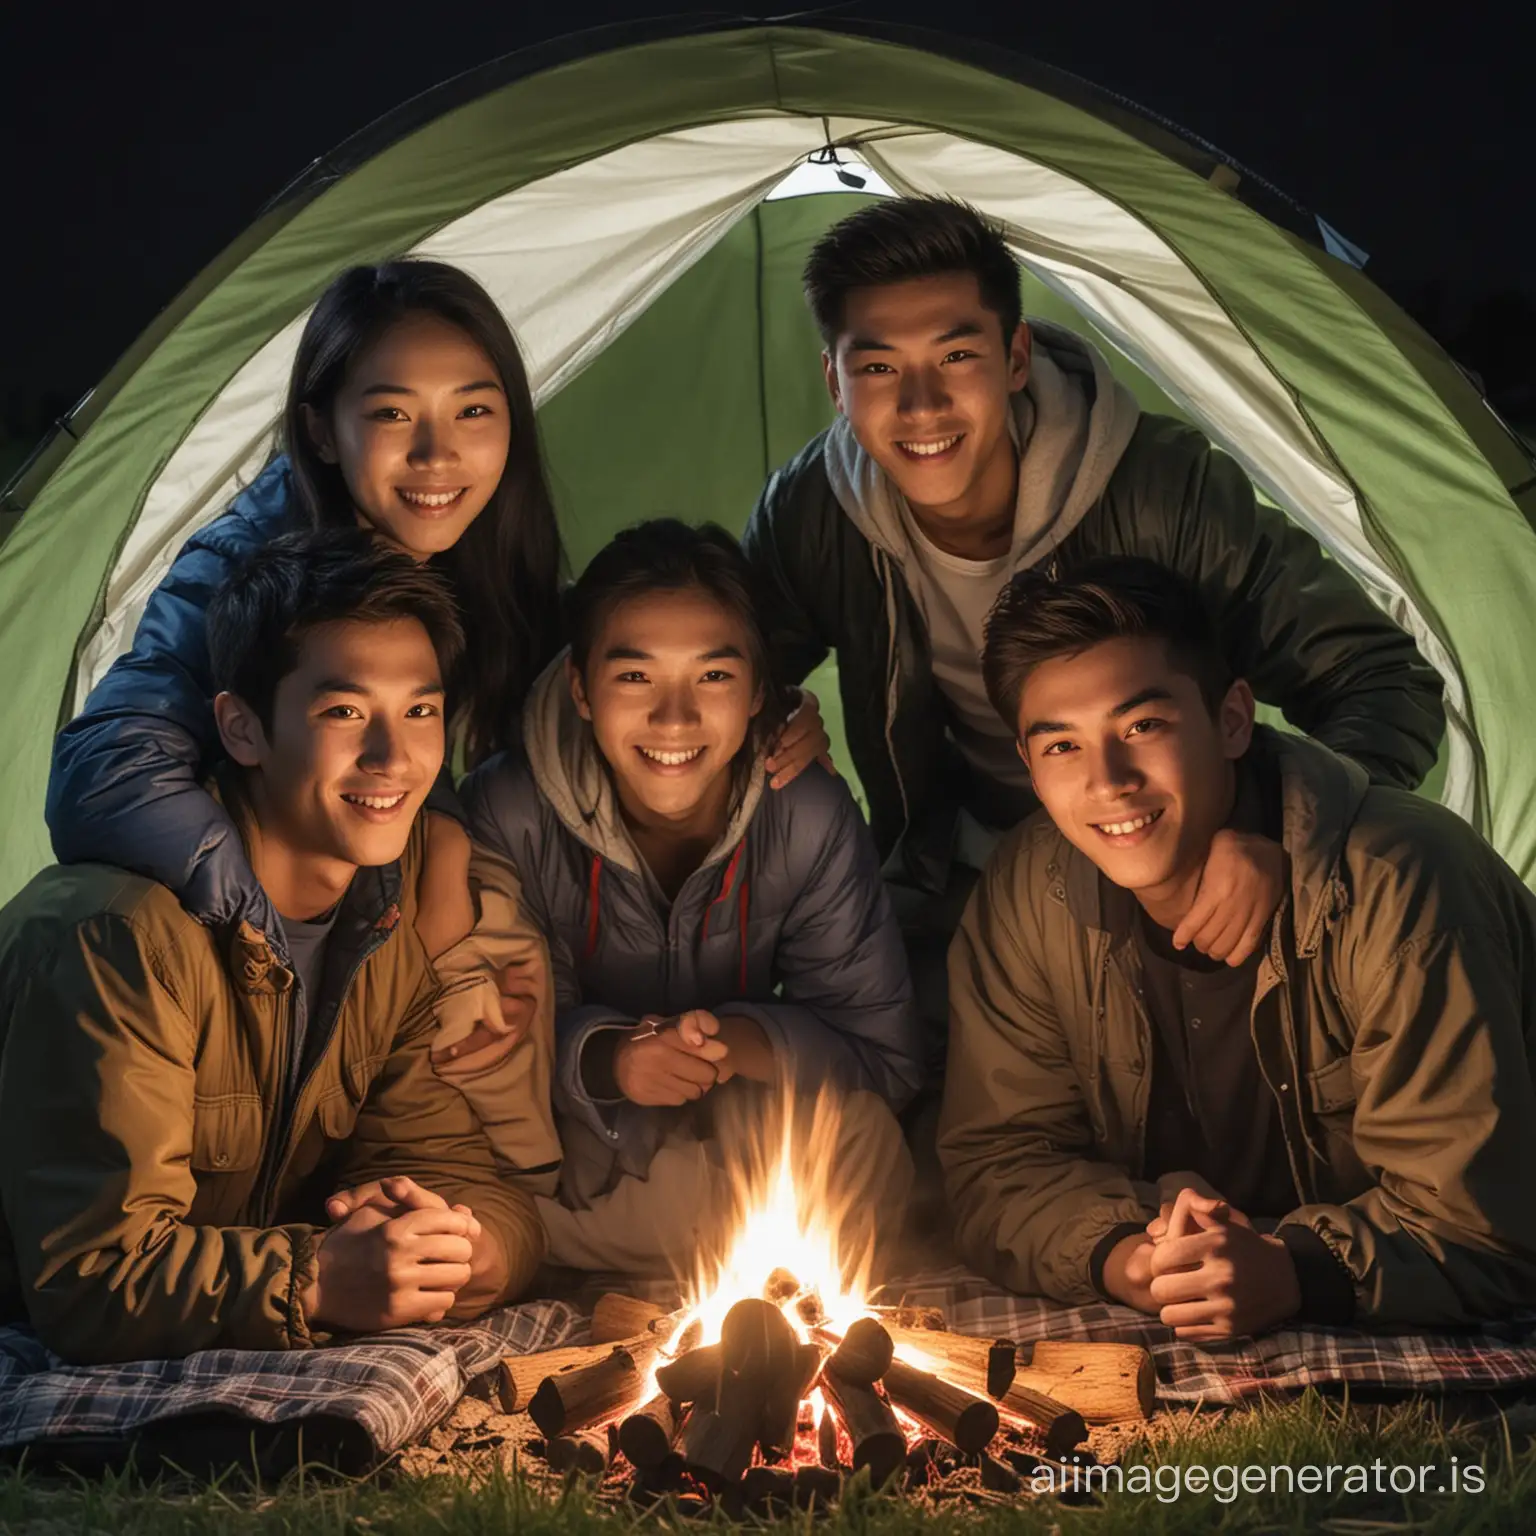 Youthful-Camping-Adventure-European-and-Asian-Families-Bonding-Under-the-Stars